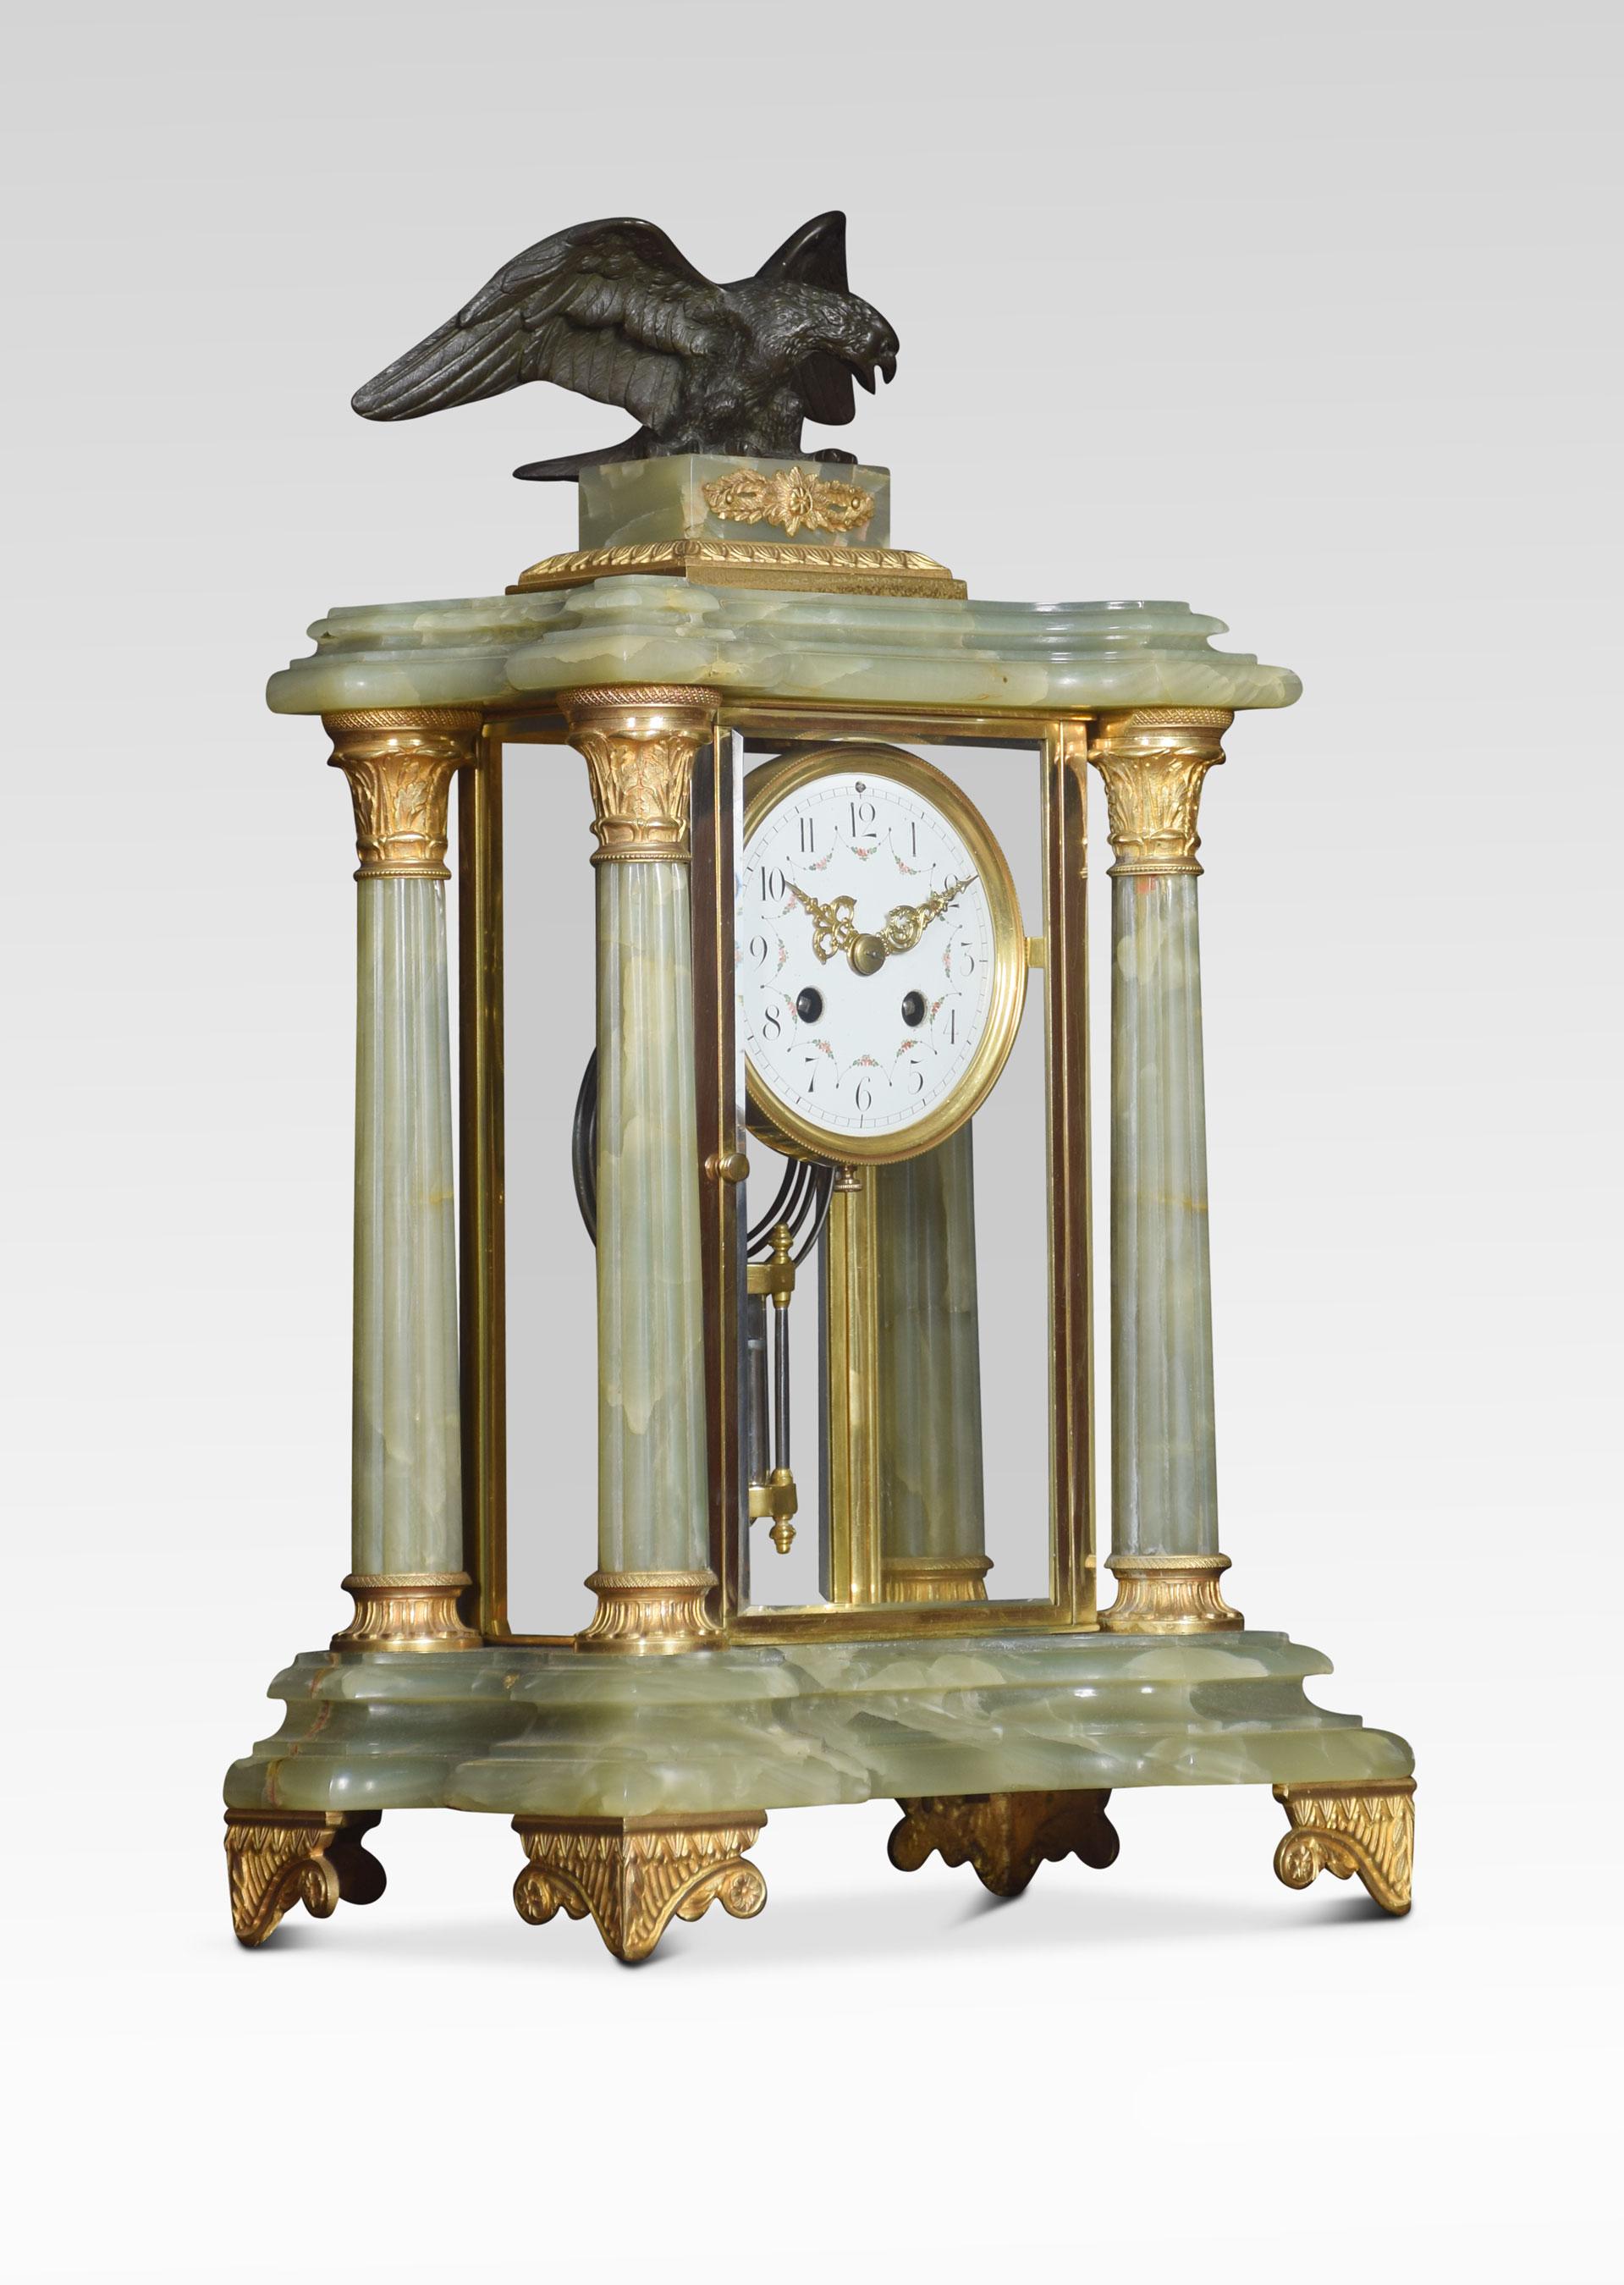 Late 19th century French onyx clock set, the case surmounted with a cast bronze eagle upon a rectangular plinth, supported on four fluted Corinthian columns applied with gilt metal mounts, encasing the four glass panels encasing the enameled dial